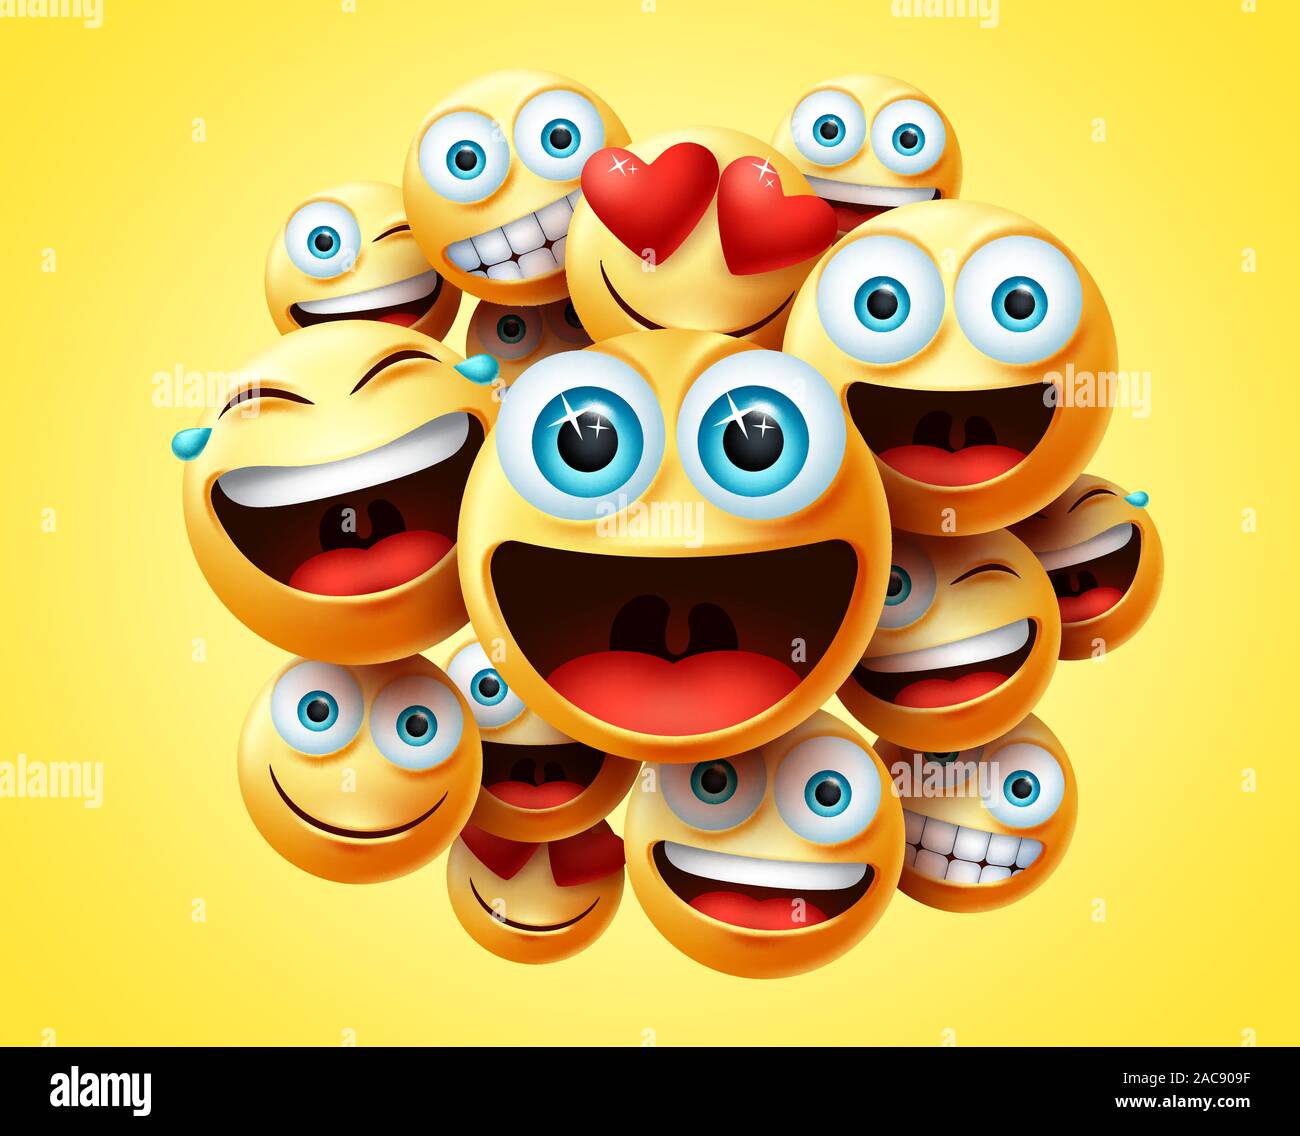 Smileys emoticons group vector design. Smileys emoticon cute faces group in excited, laughing, funny, happy and naughty feelings or mood for sign. Stock Vector